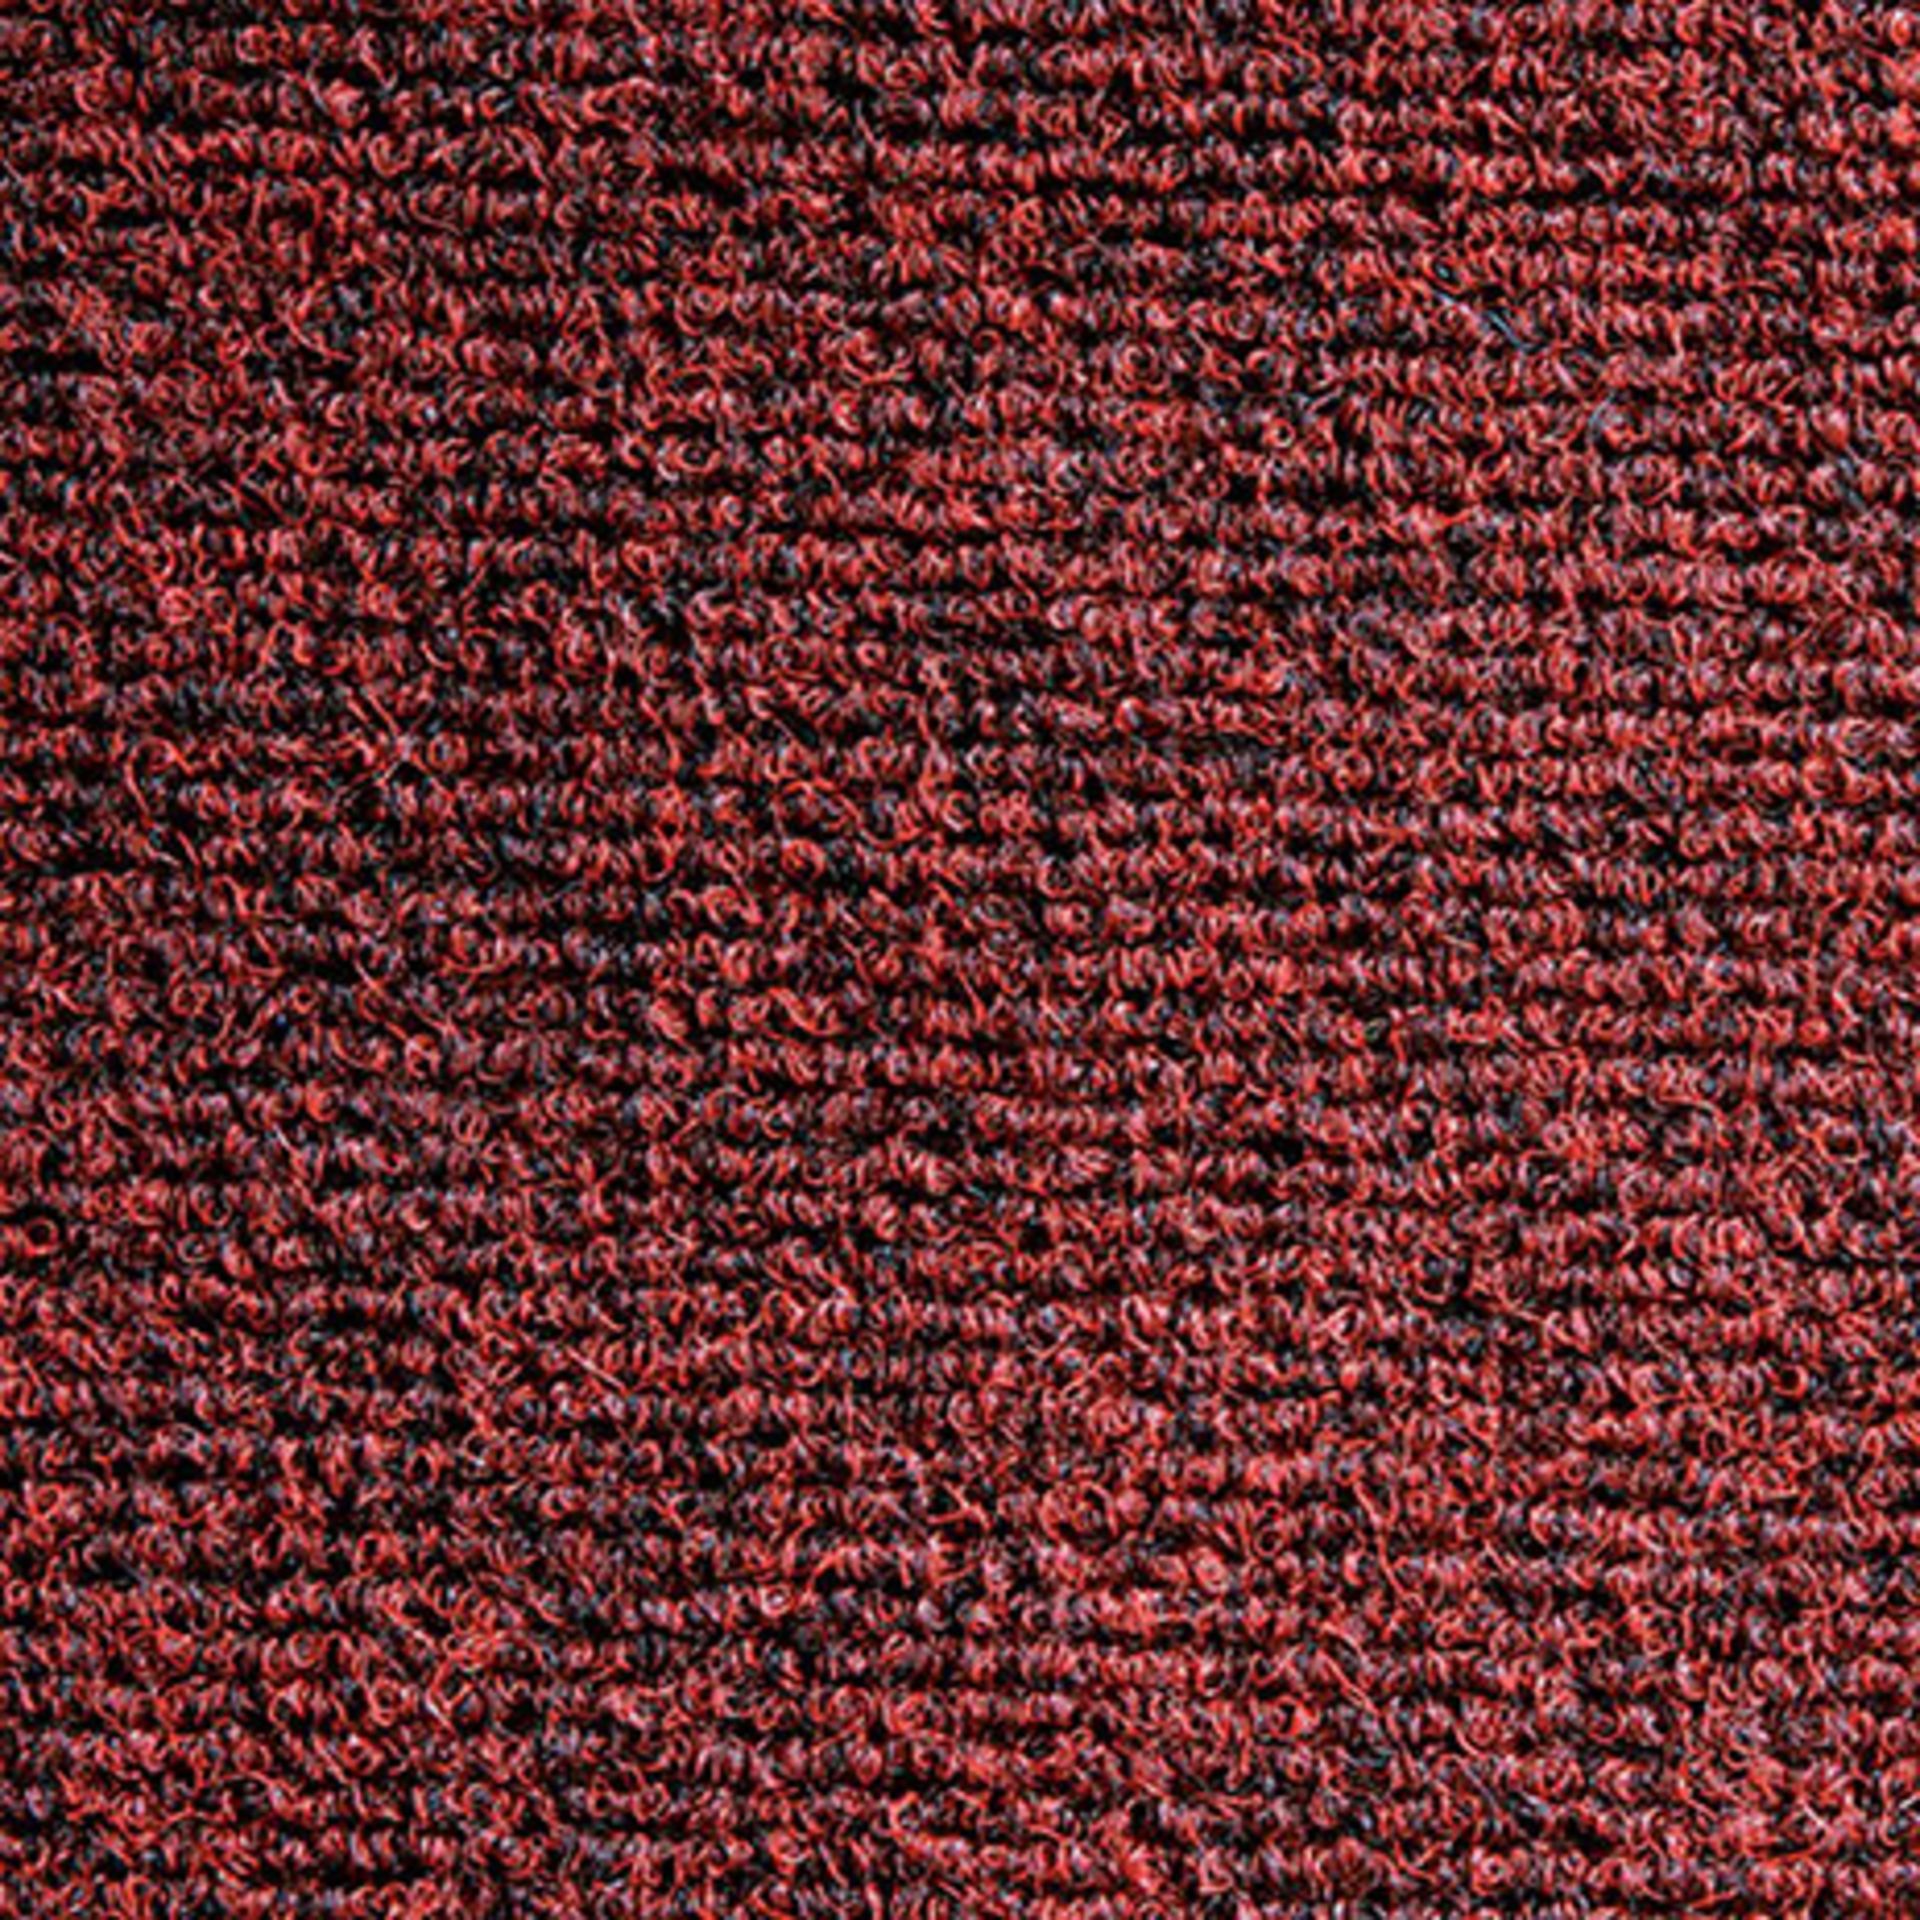 Heckmondwike Supacord - Claret Supacord is a fibre bonded contract carpet widely specified for